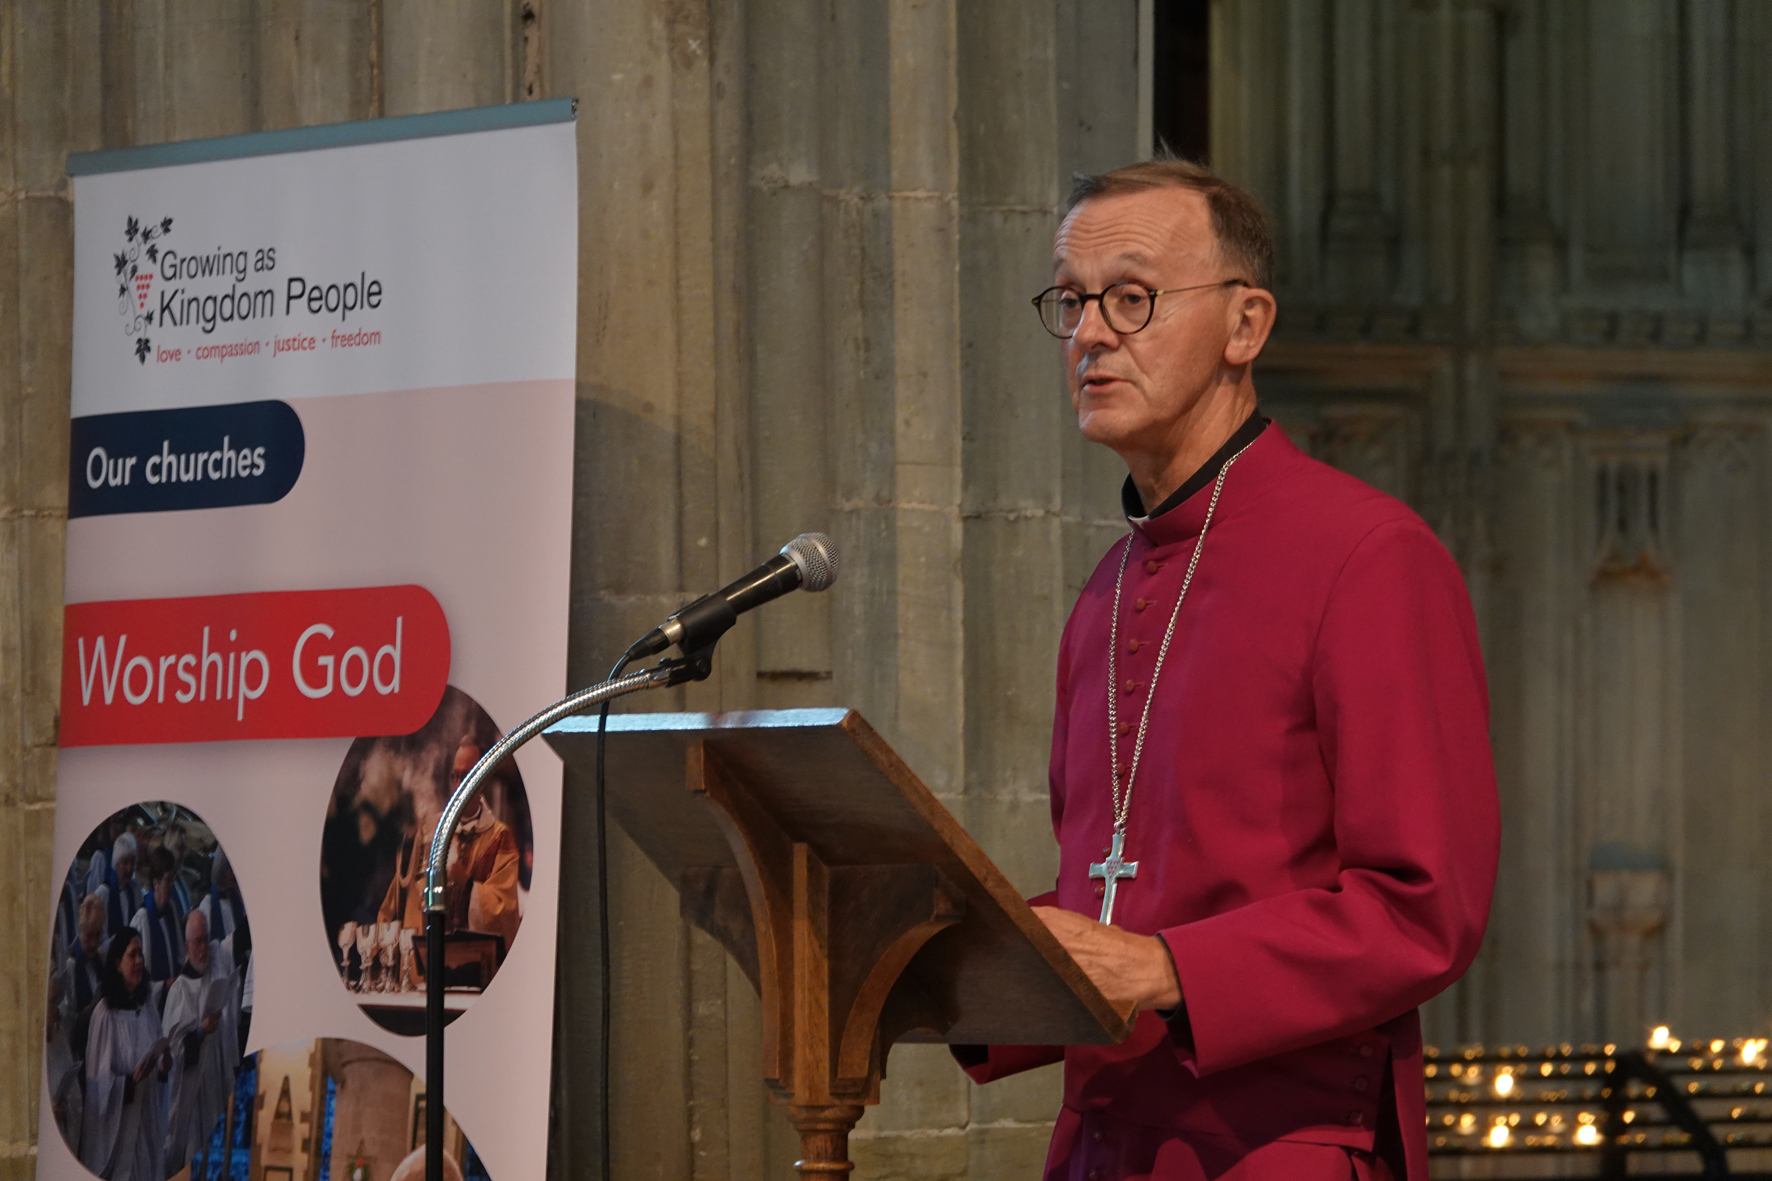 Bishop John at the lectern in the cathedral launching praying for growth